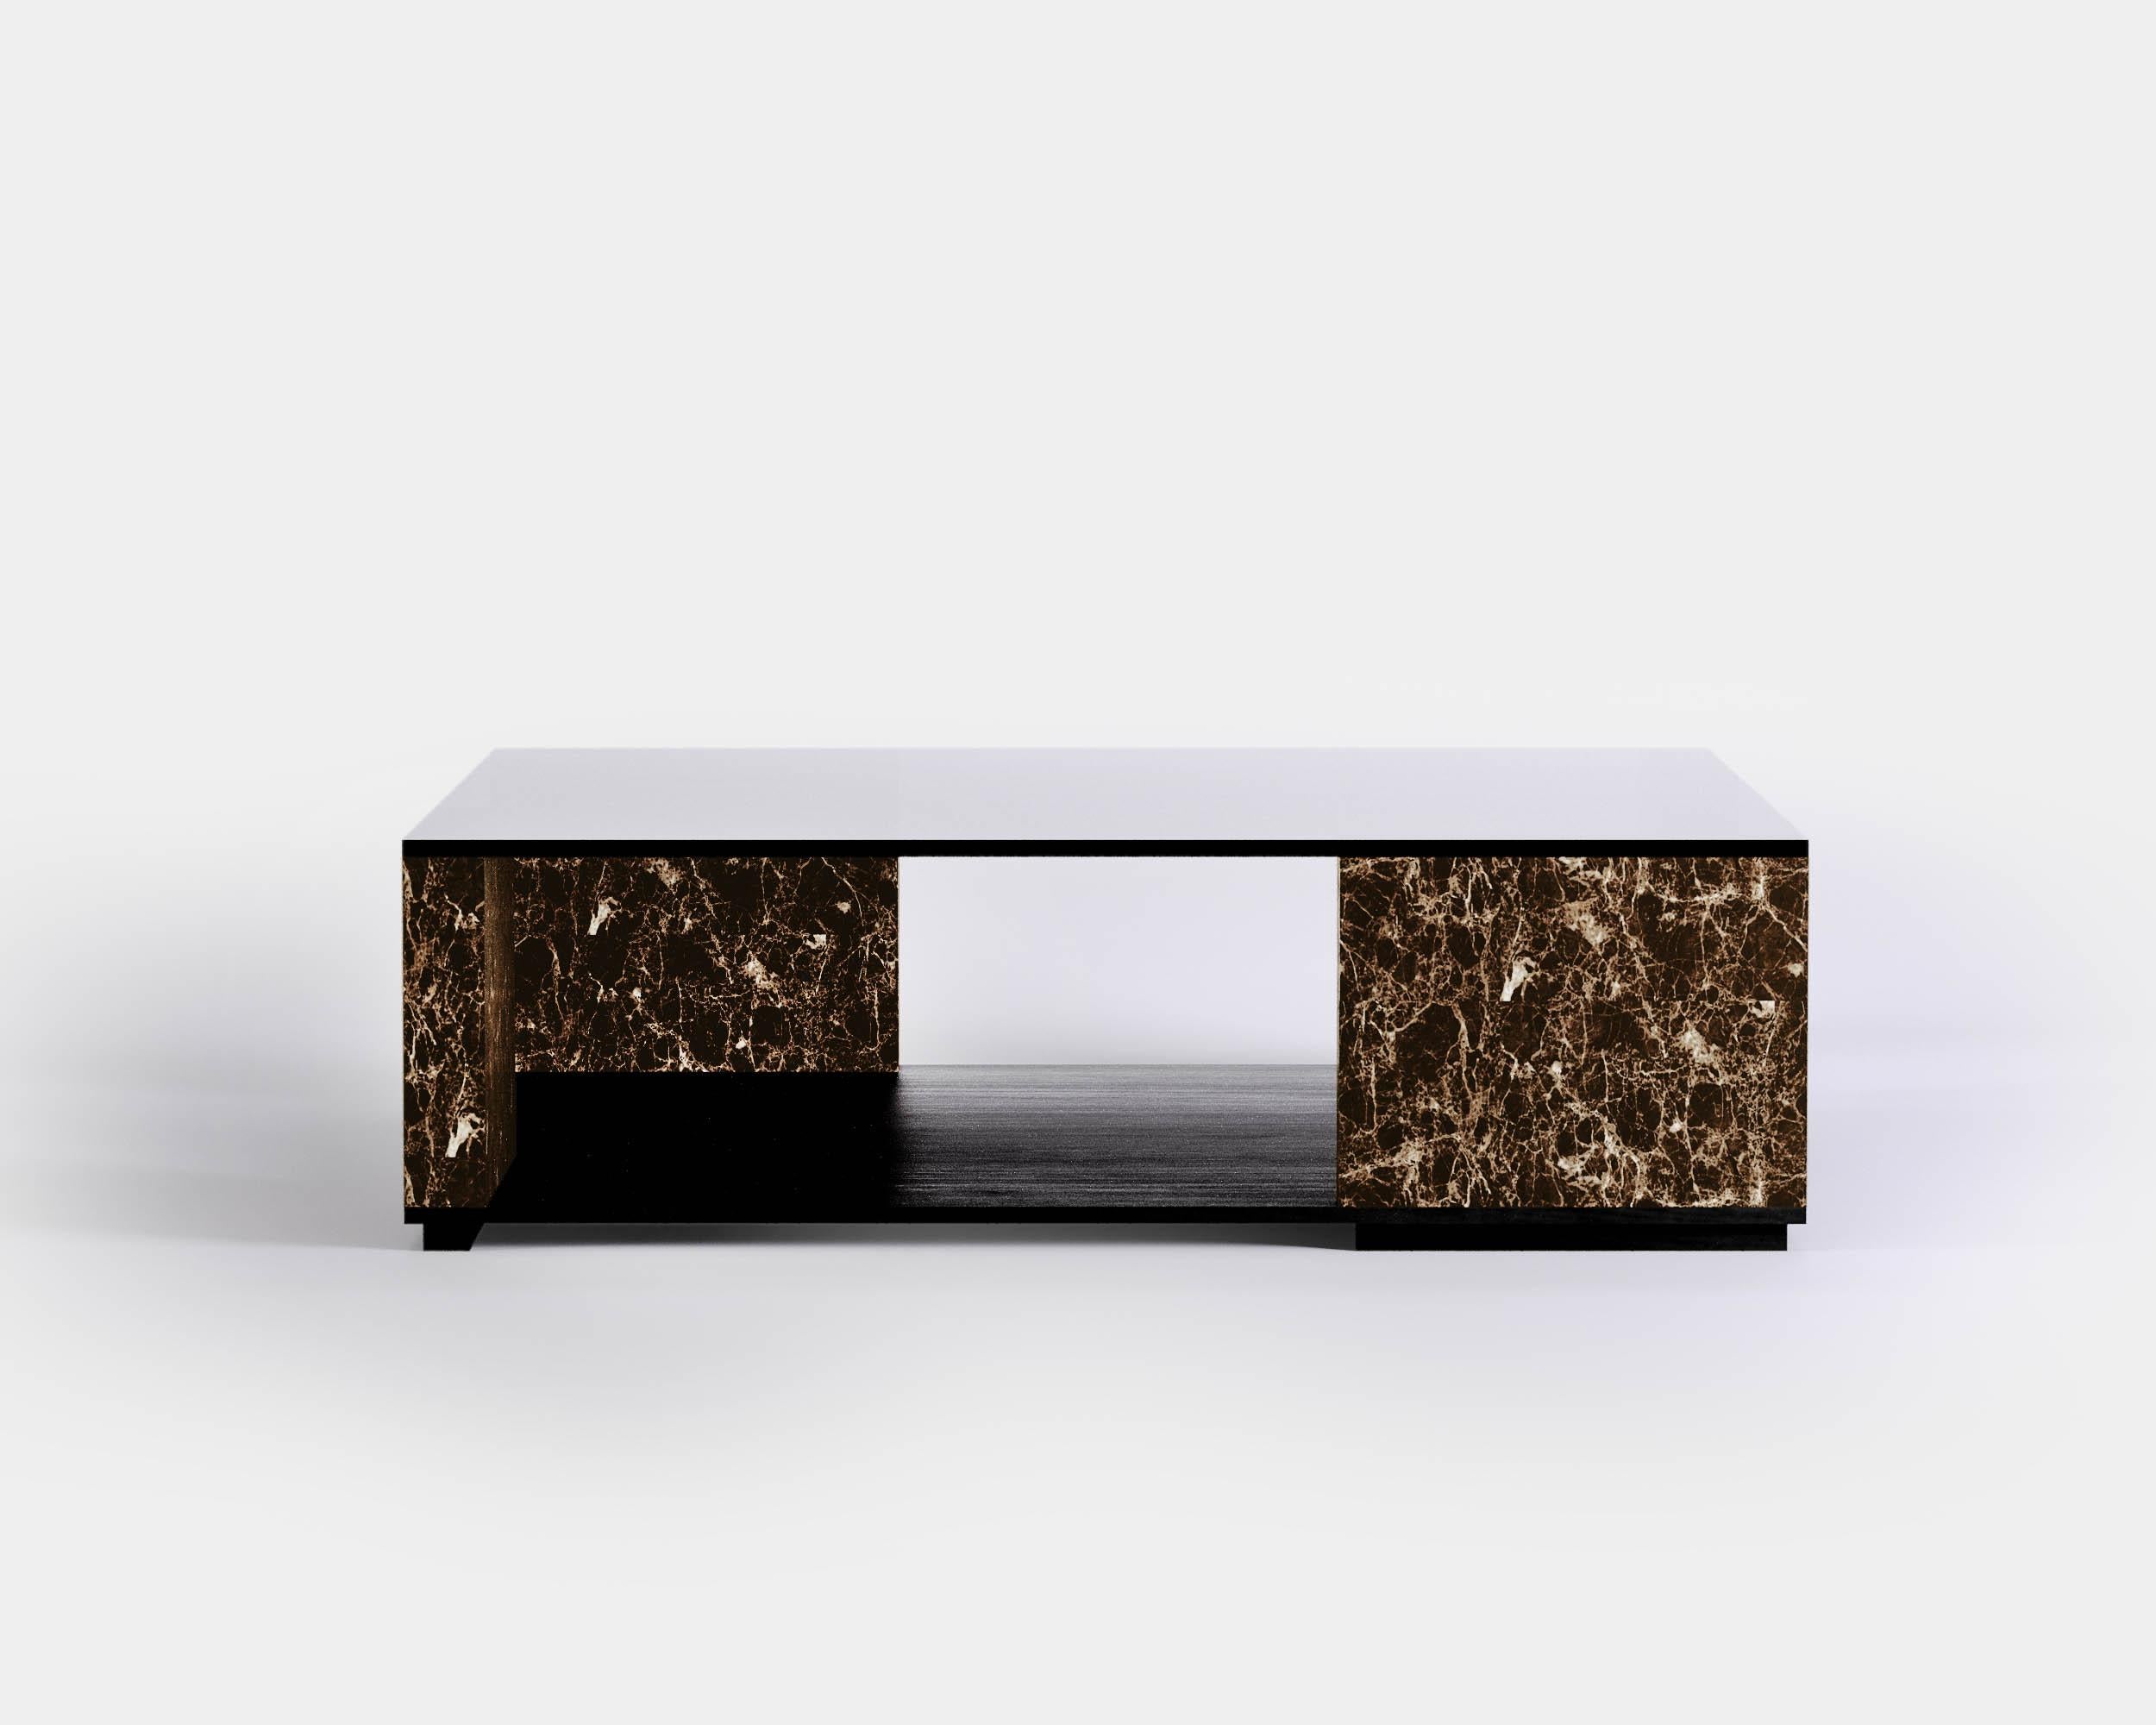 Quattropietre Coffee Table by Amura Lab 

Toptable : Smoked Mirror
Marble legs : Emperador 

Dimensions : H. 35,5 x 120 x 120

A coffee table that embodies the application of an architectonic stereotype to a furniture piece. Quattropietre represents